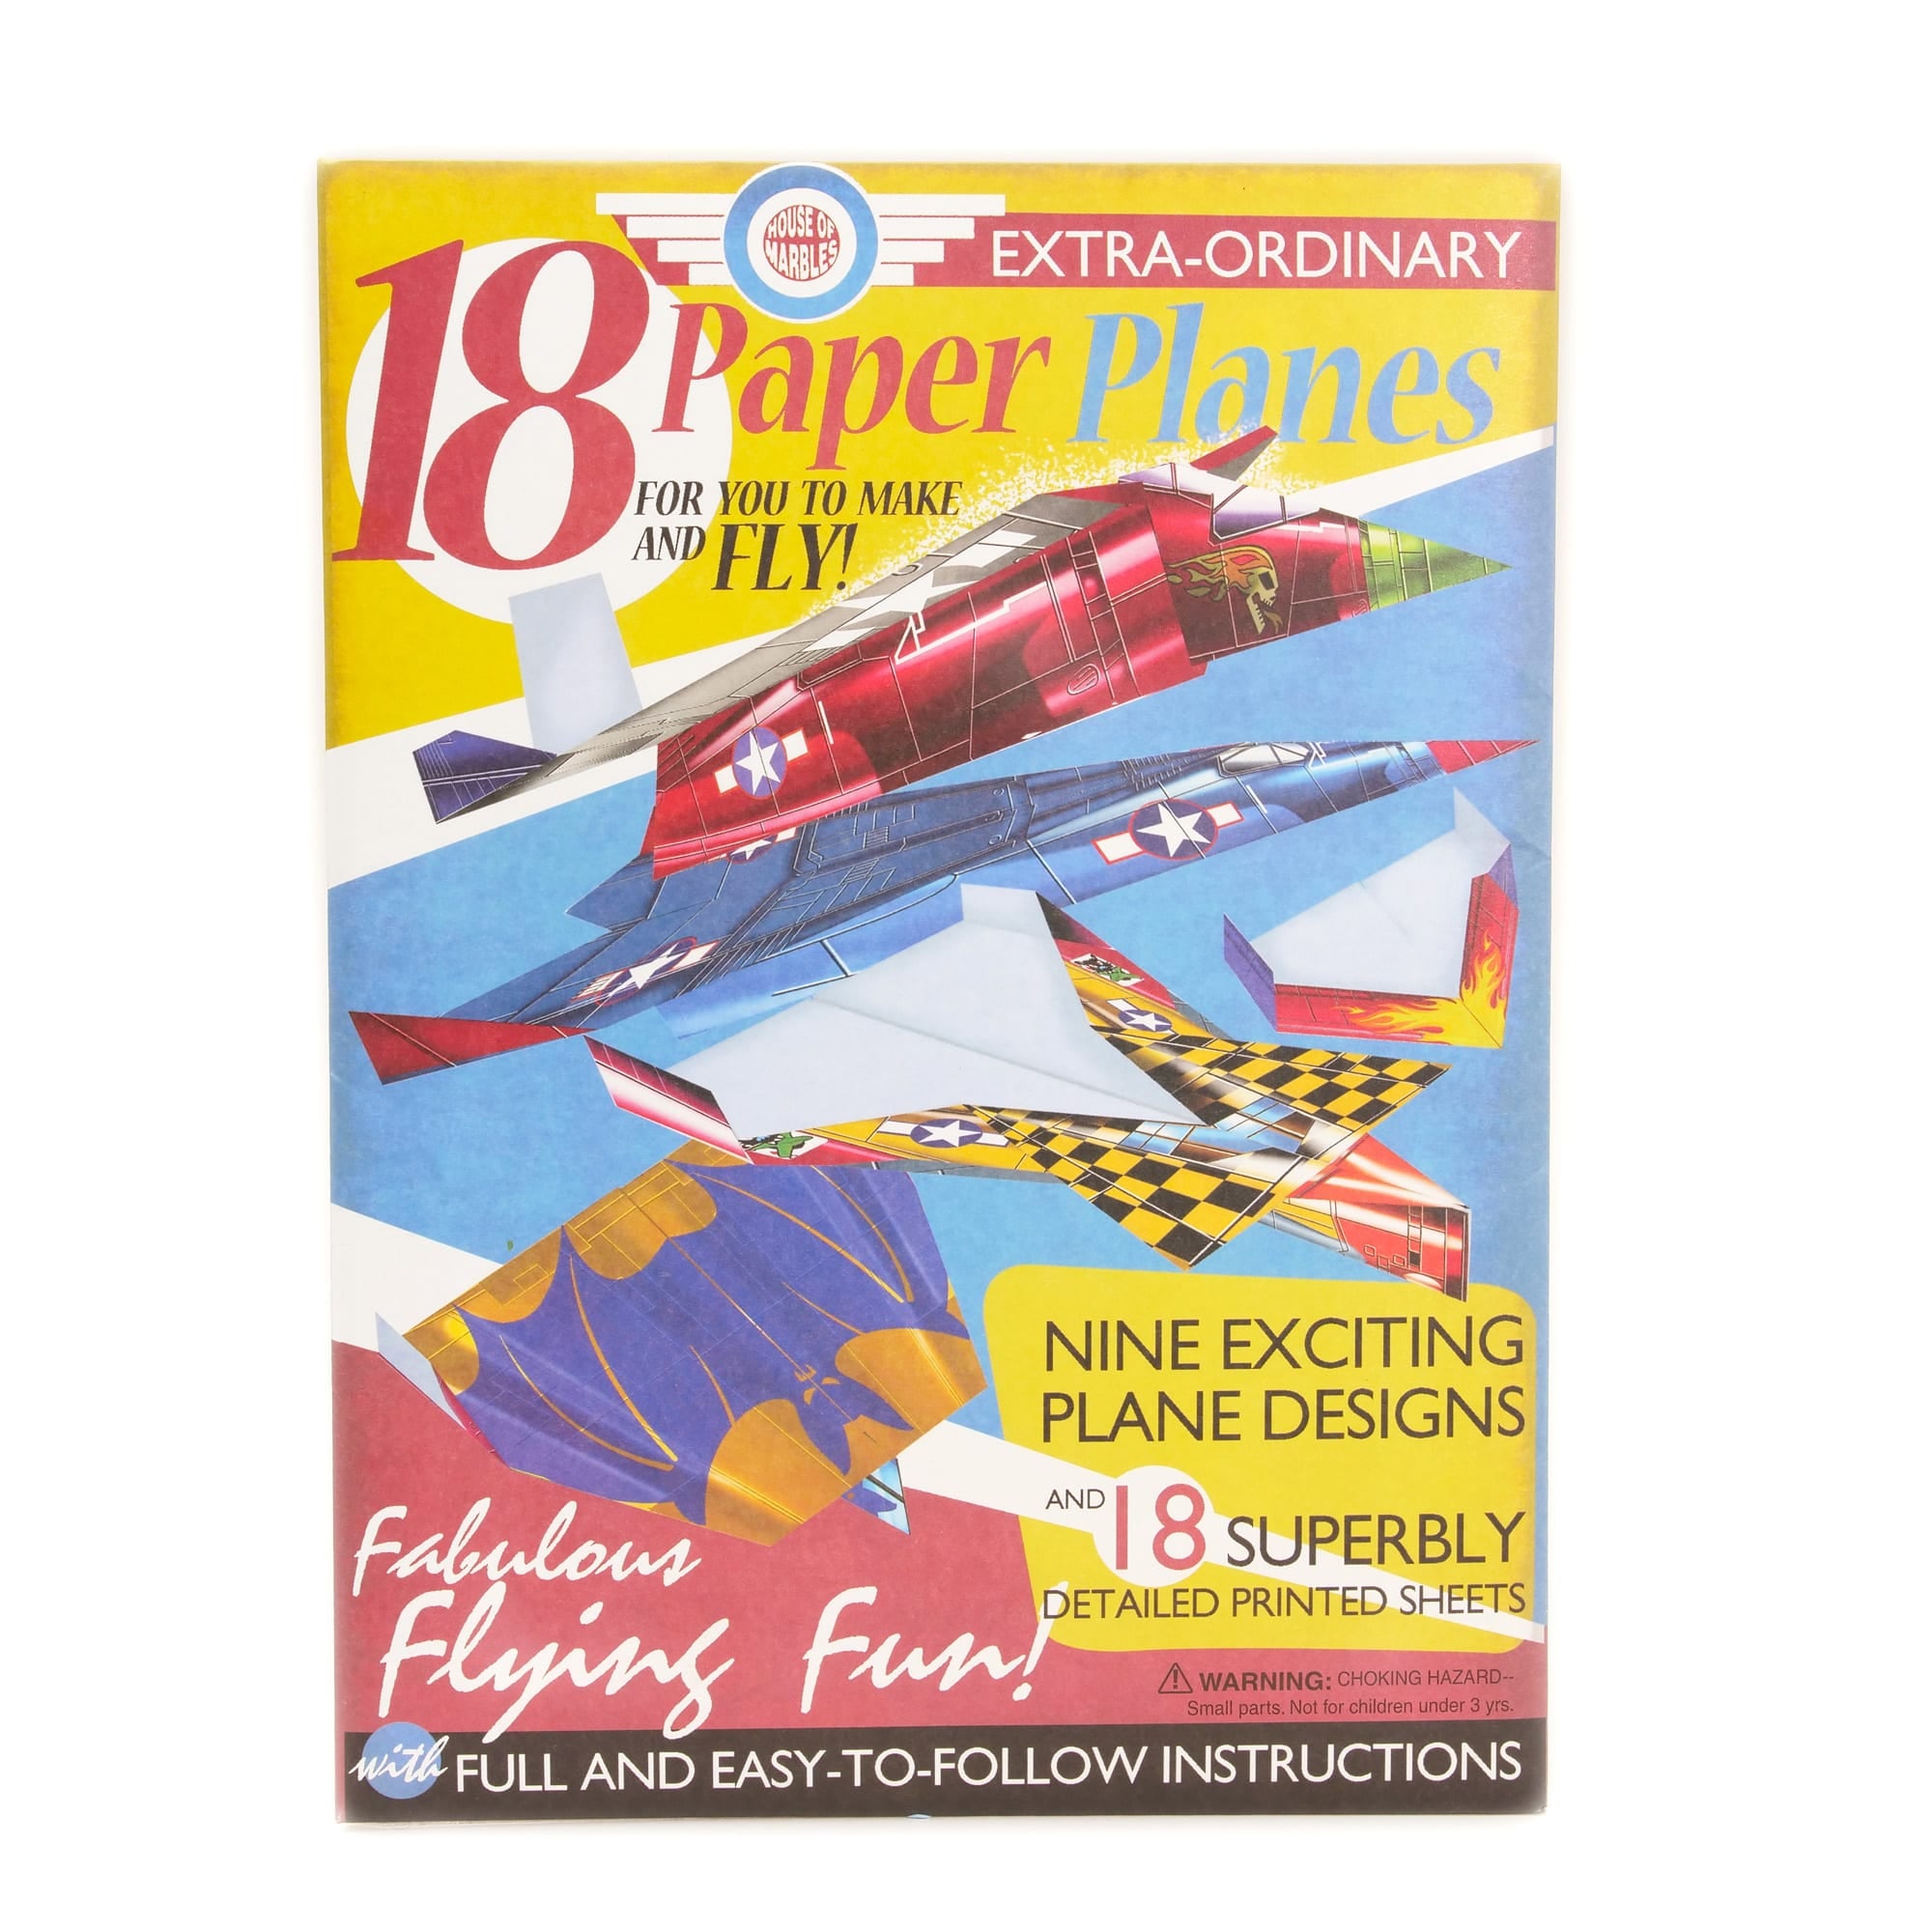 18 PAPER PLANES KIT - HOUSE OF MARBLES